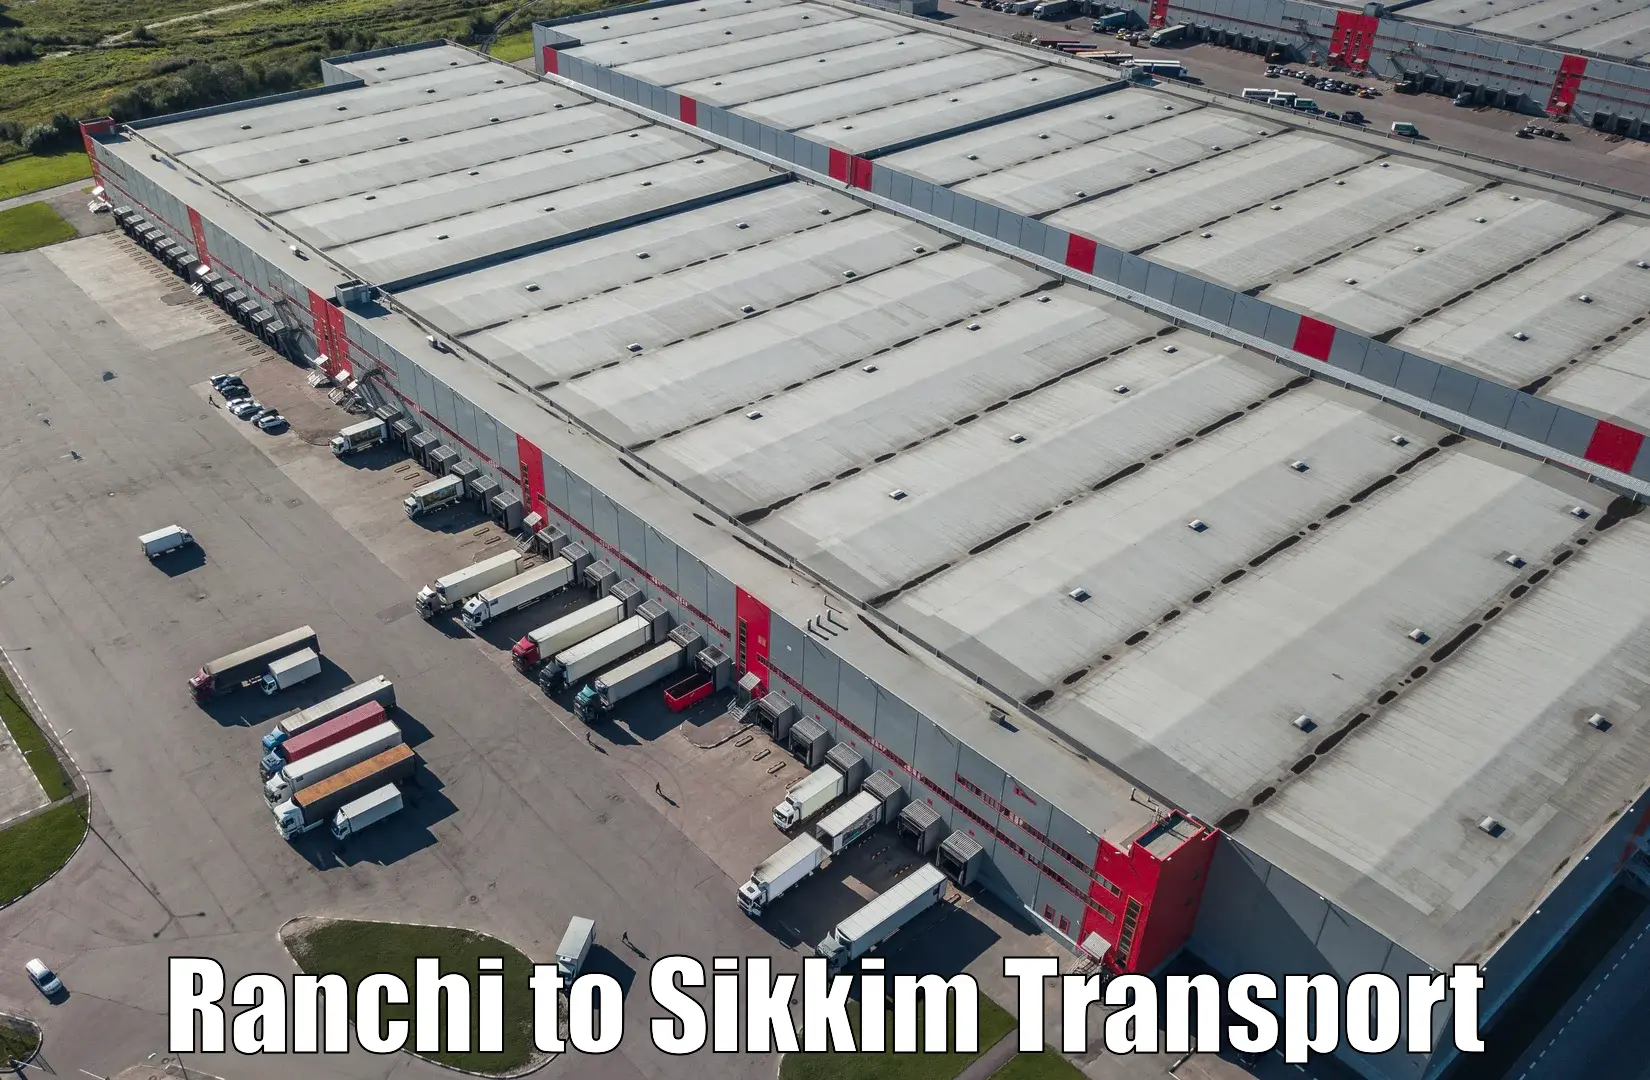 Nearby transport service Ranchi to East Sikkim